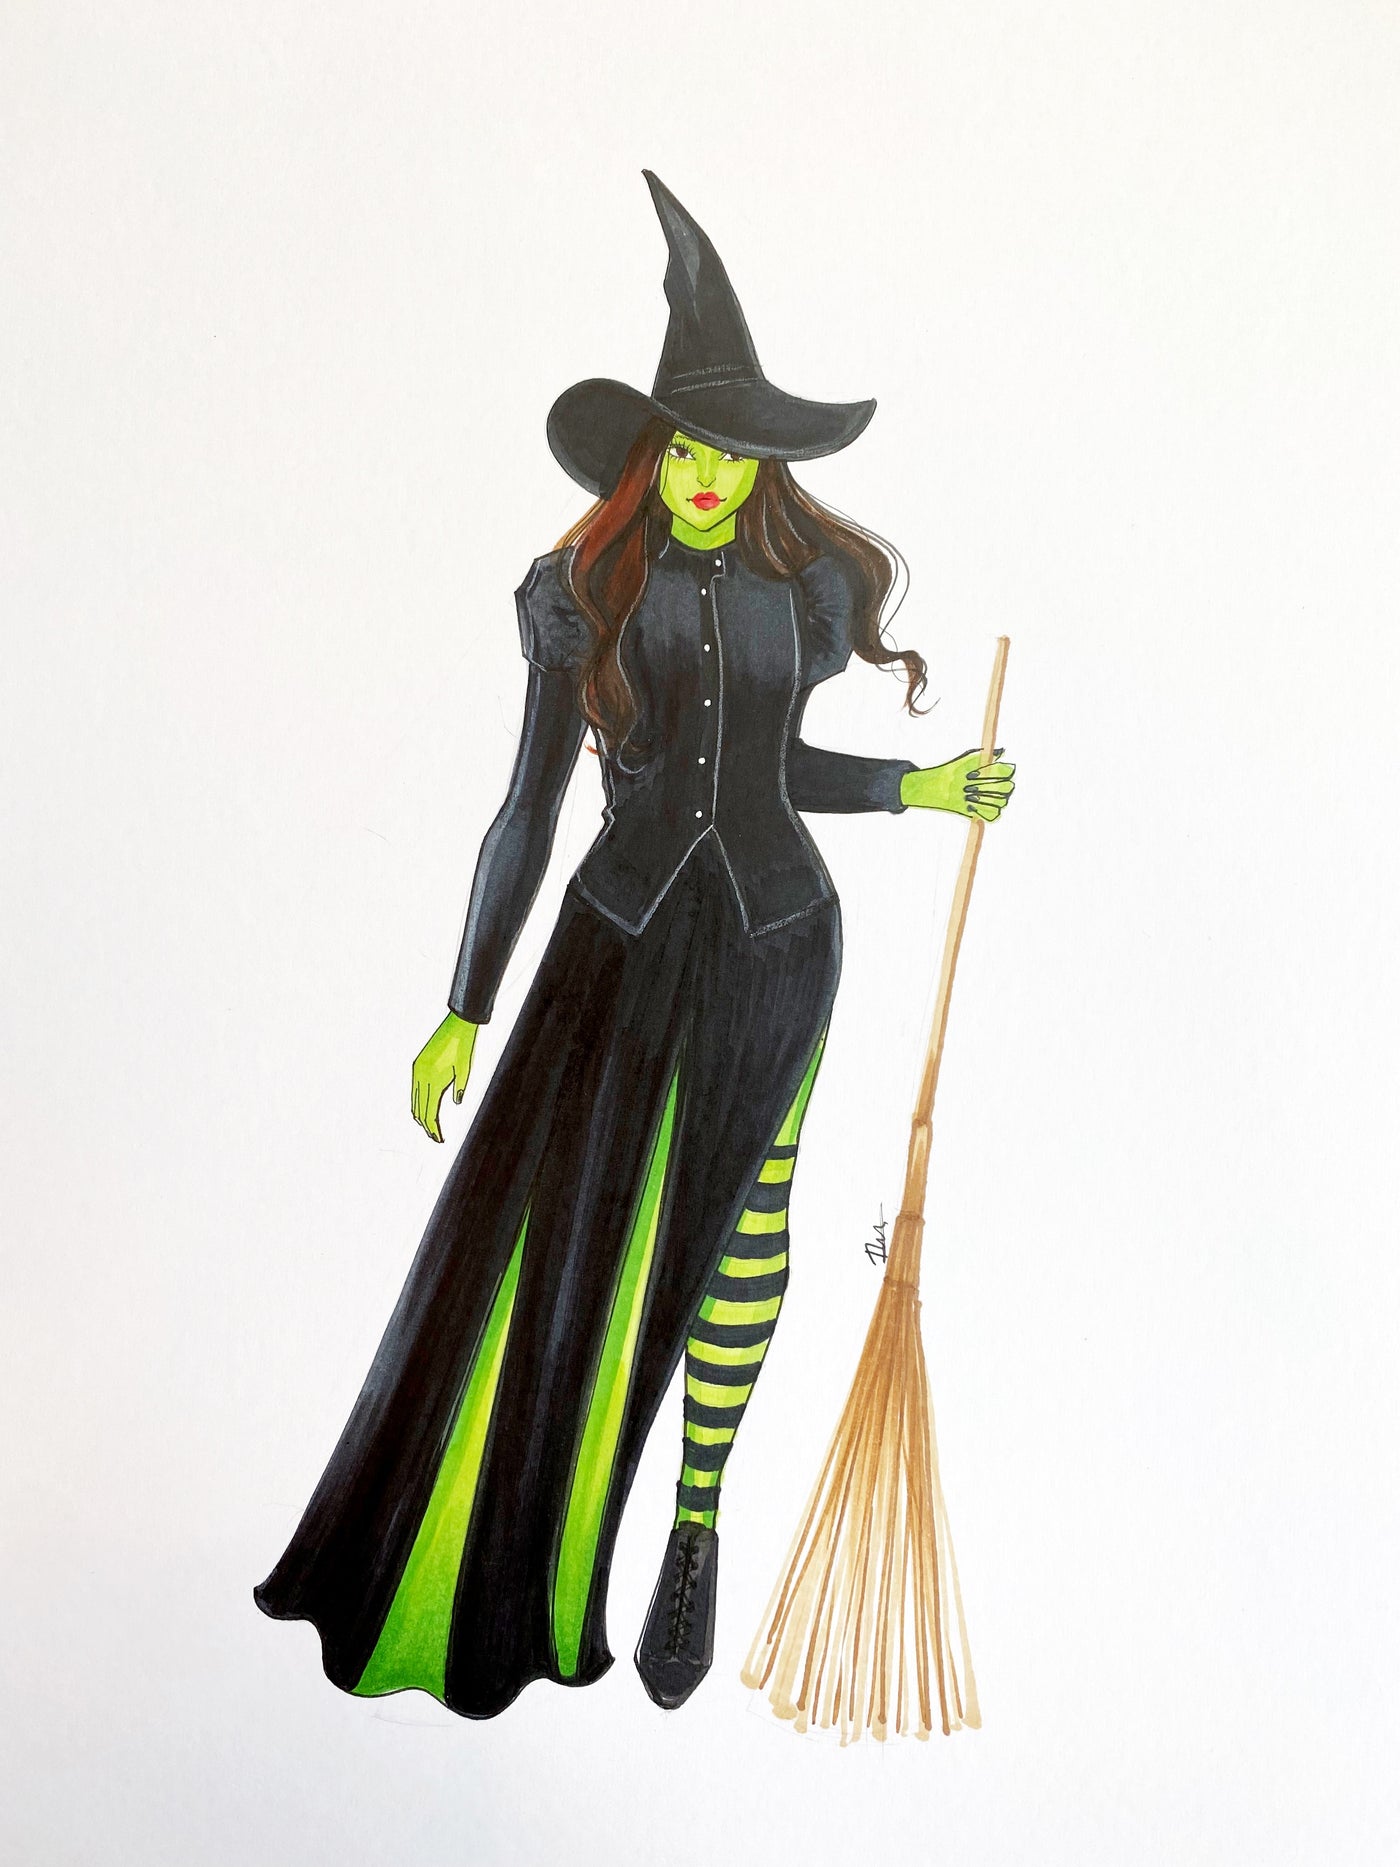 Wicked Witch Inspired Original Art